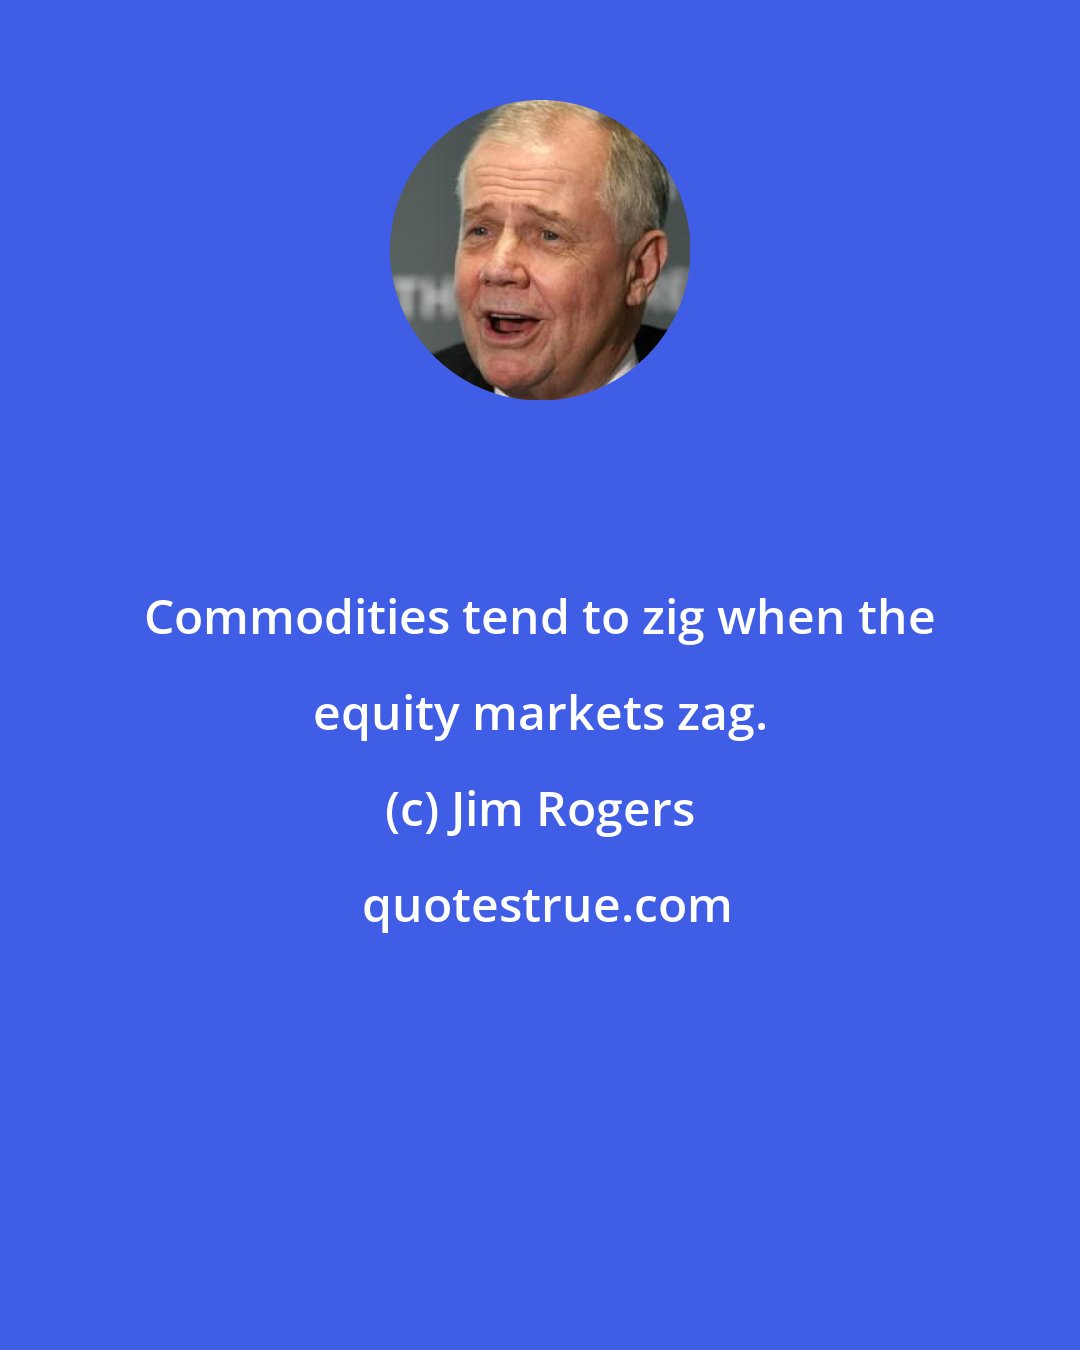 Jim Rogers: Commodities tend to zig when the equity markets zag.